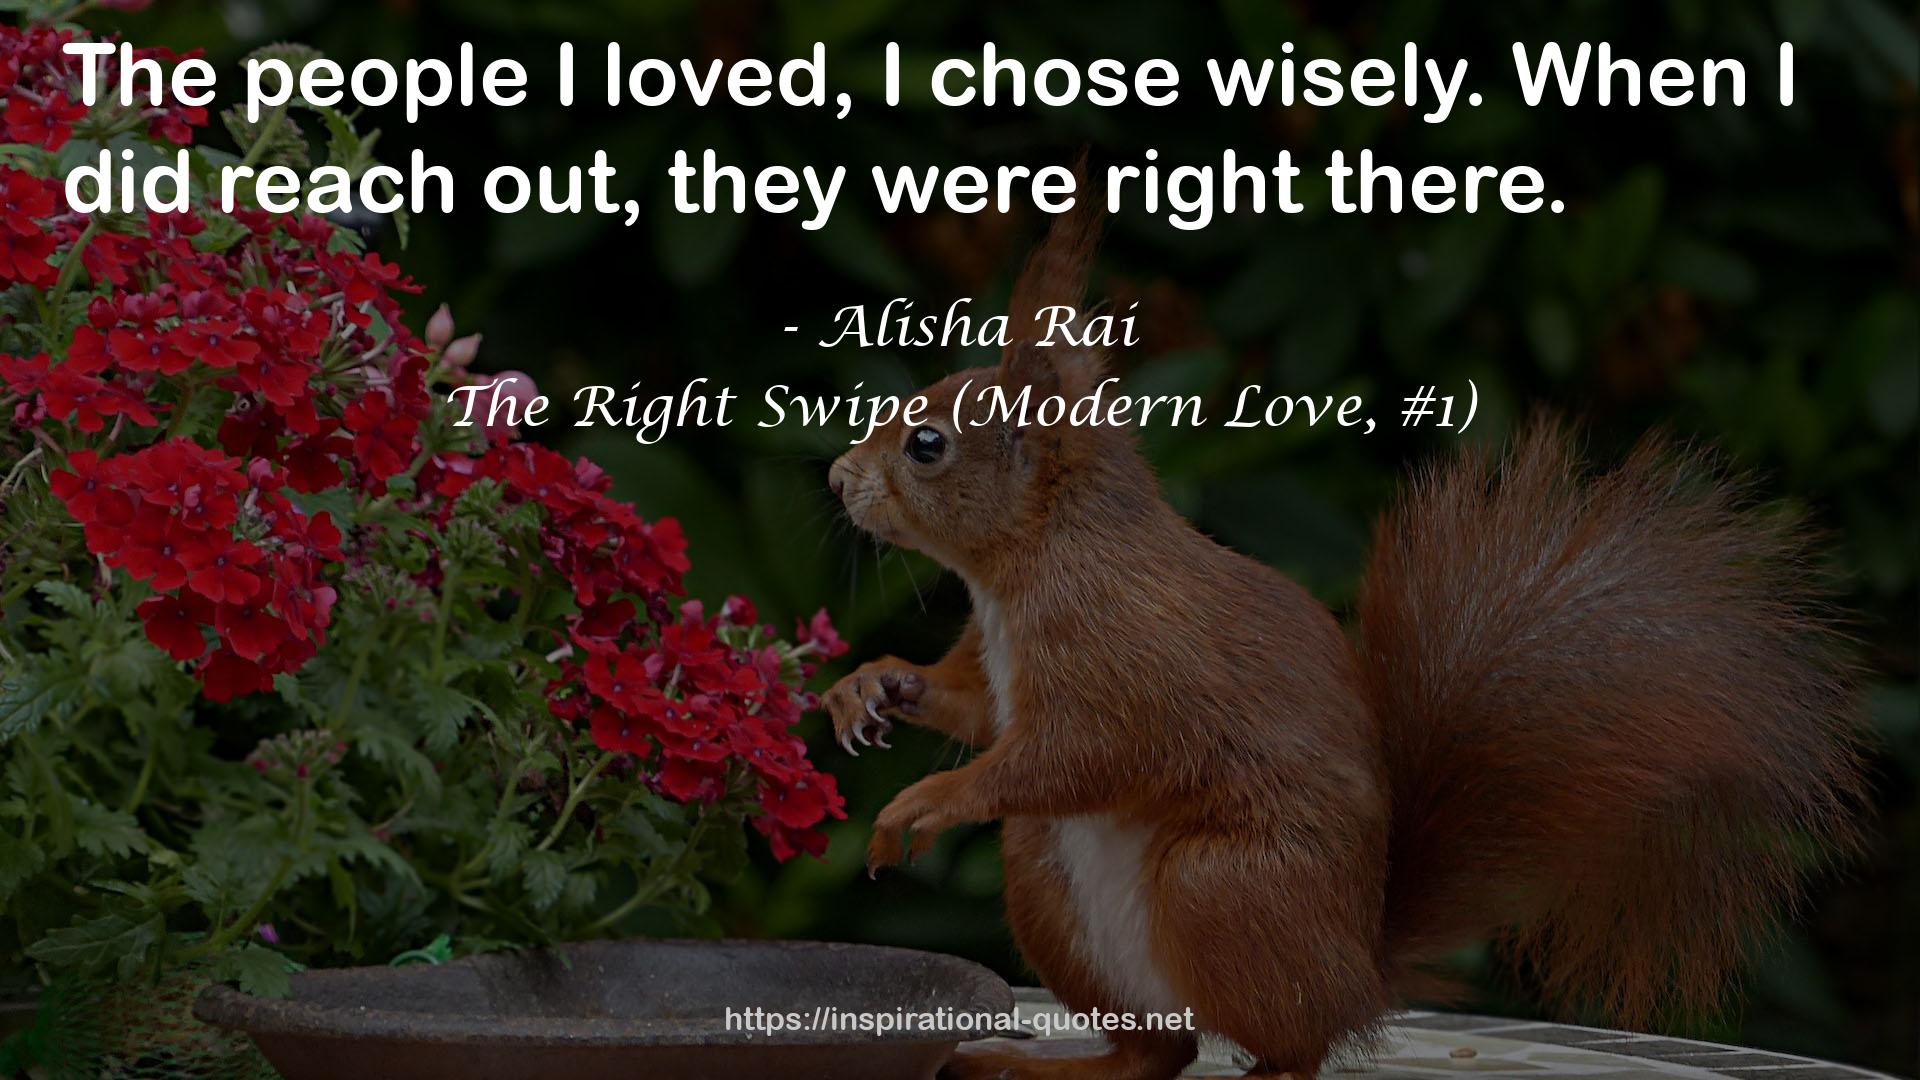 The Right Swipe (Modern Love, #1) QUOTES